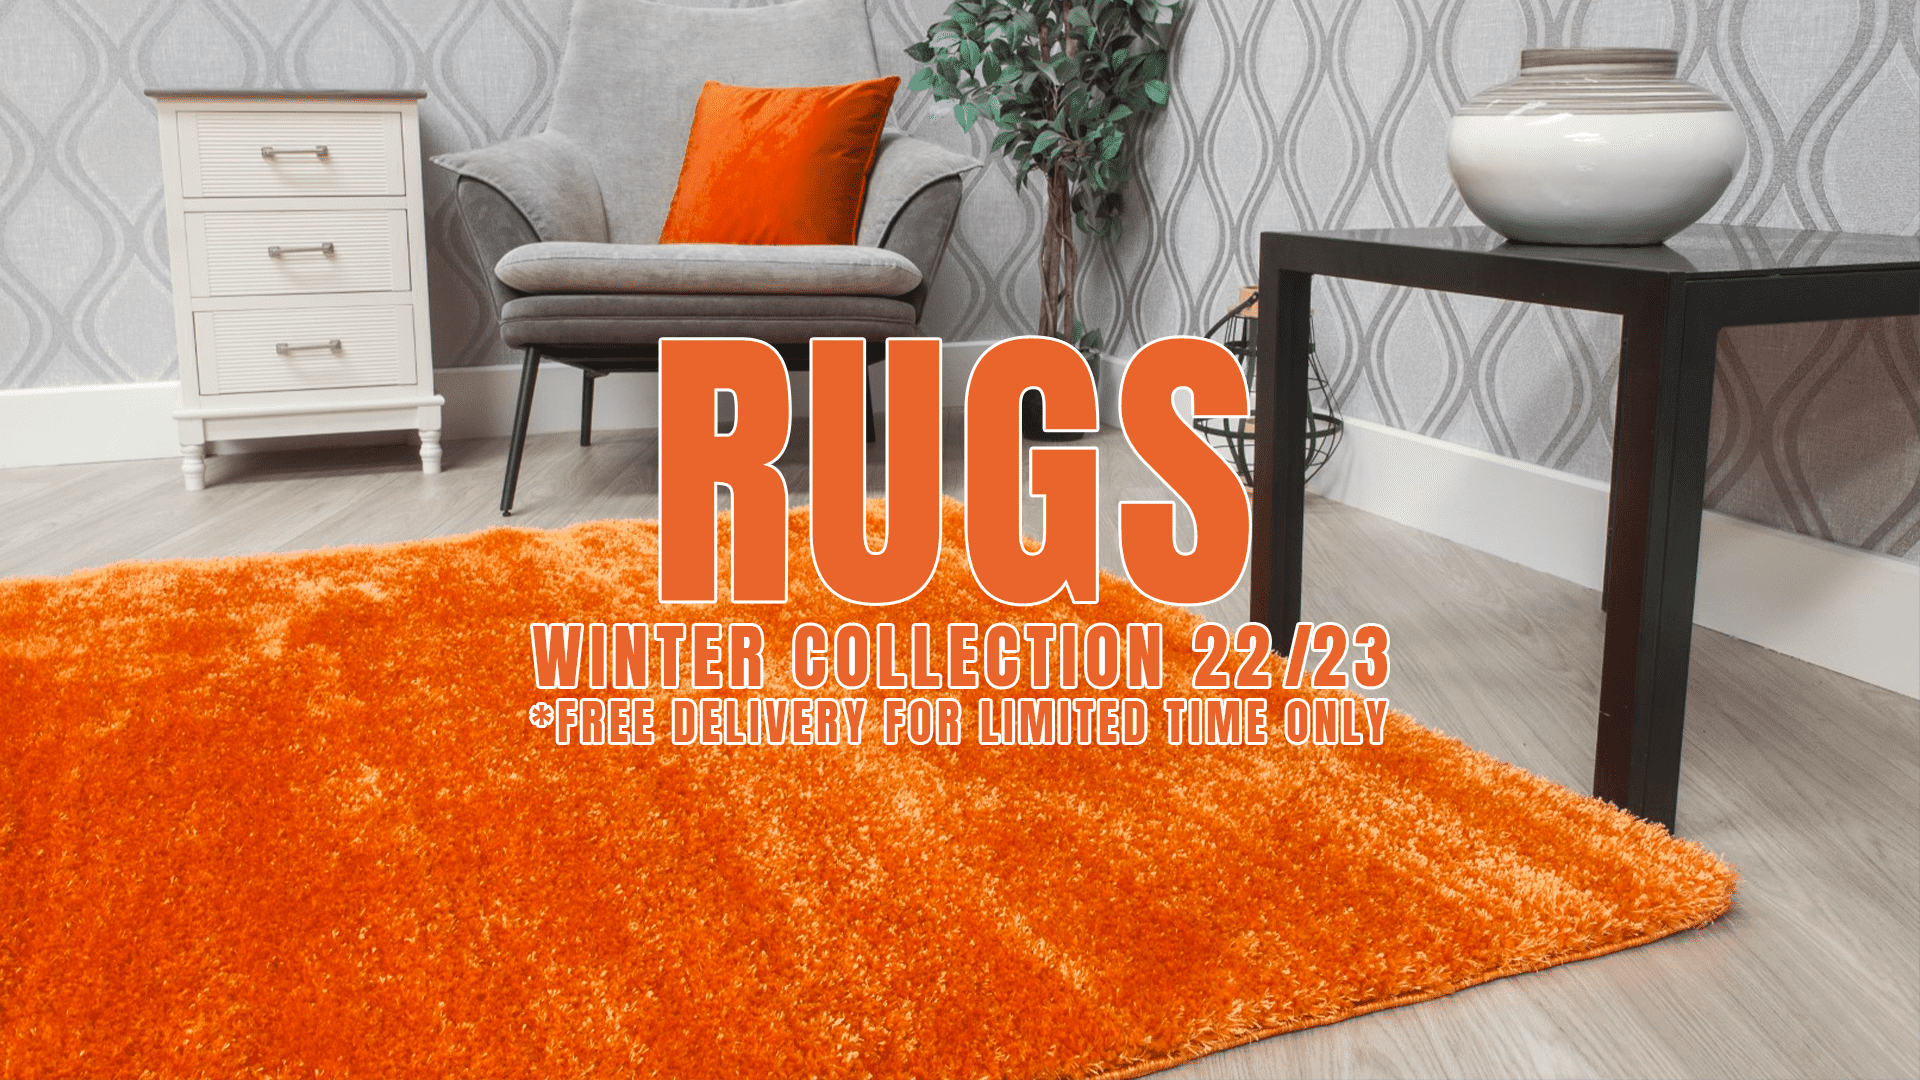 We have just launched our new online collection of Rugs just in time for Winter... Styles and sizes